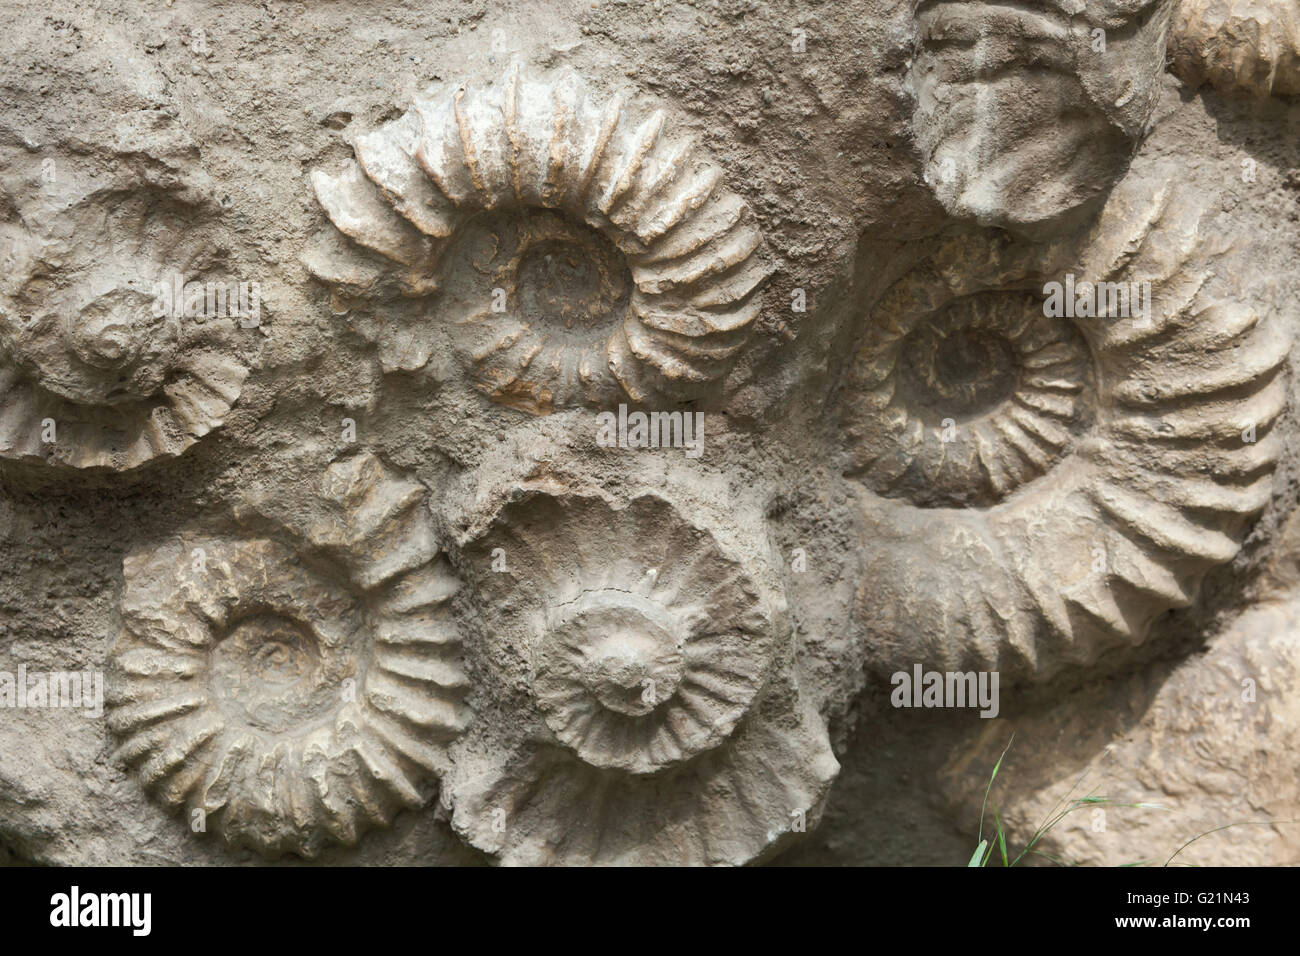 Scaphites from the family of heteromorph ammonites widespread during the Cretaceous Period found as fossils in Morocco, North Af Stock Photo